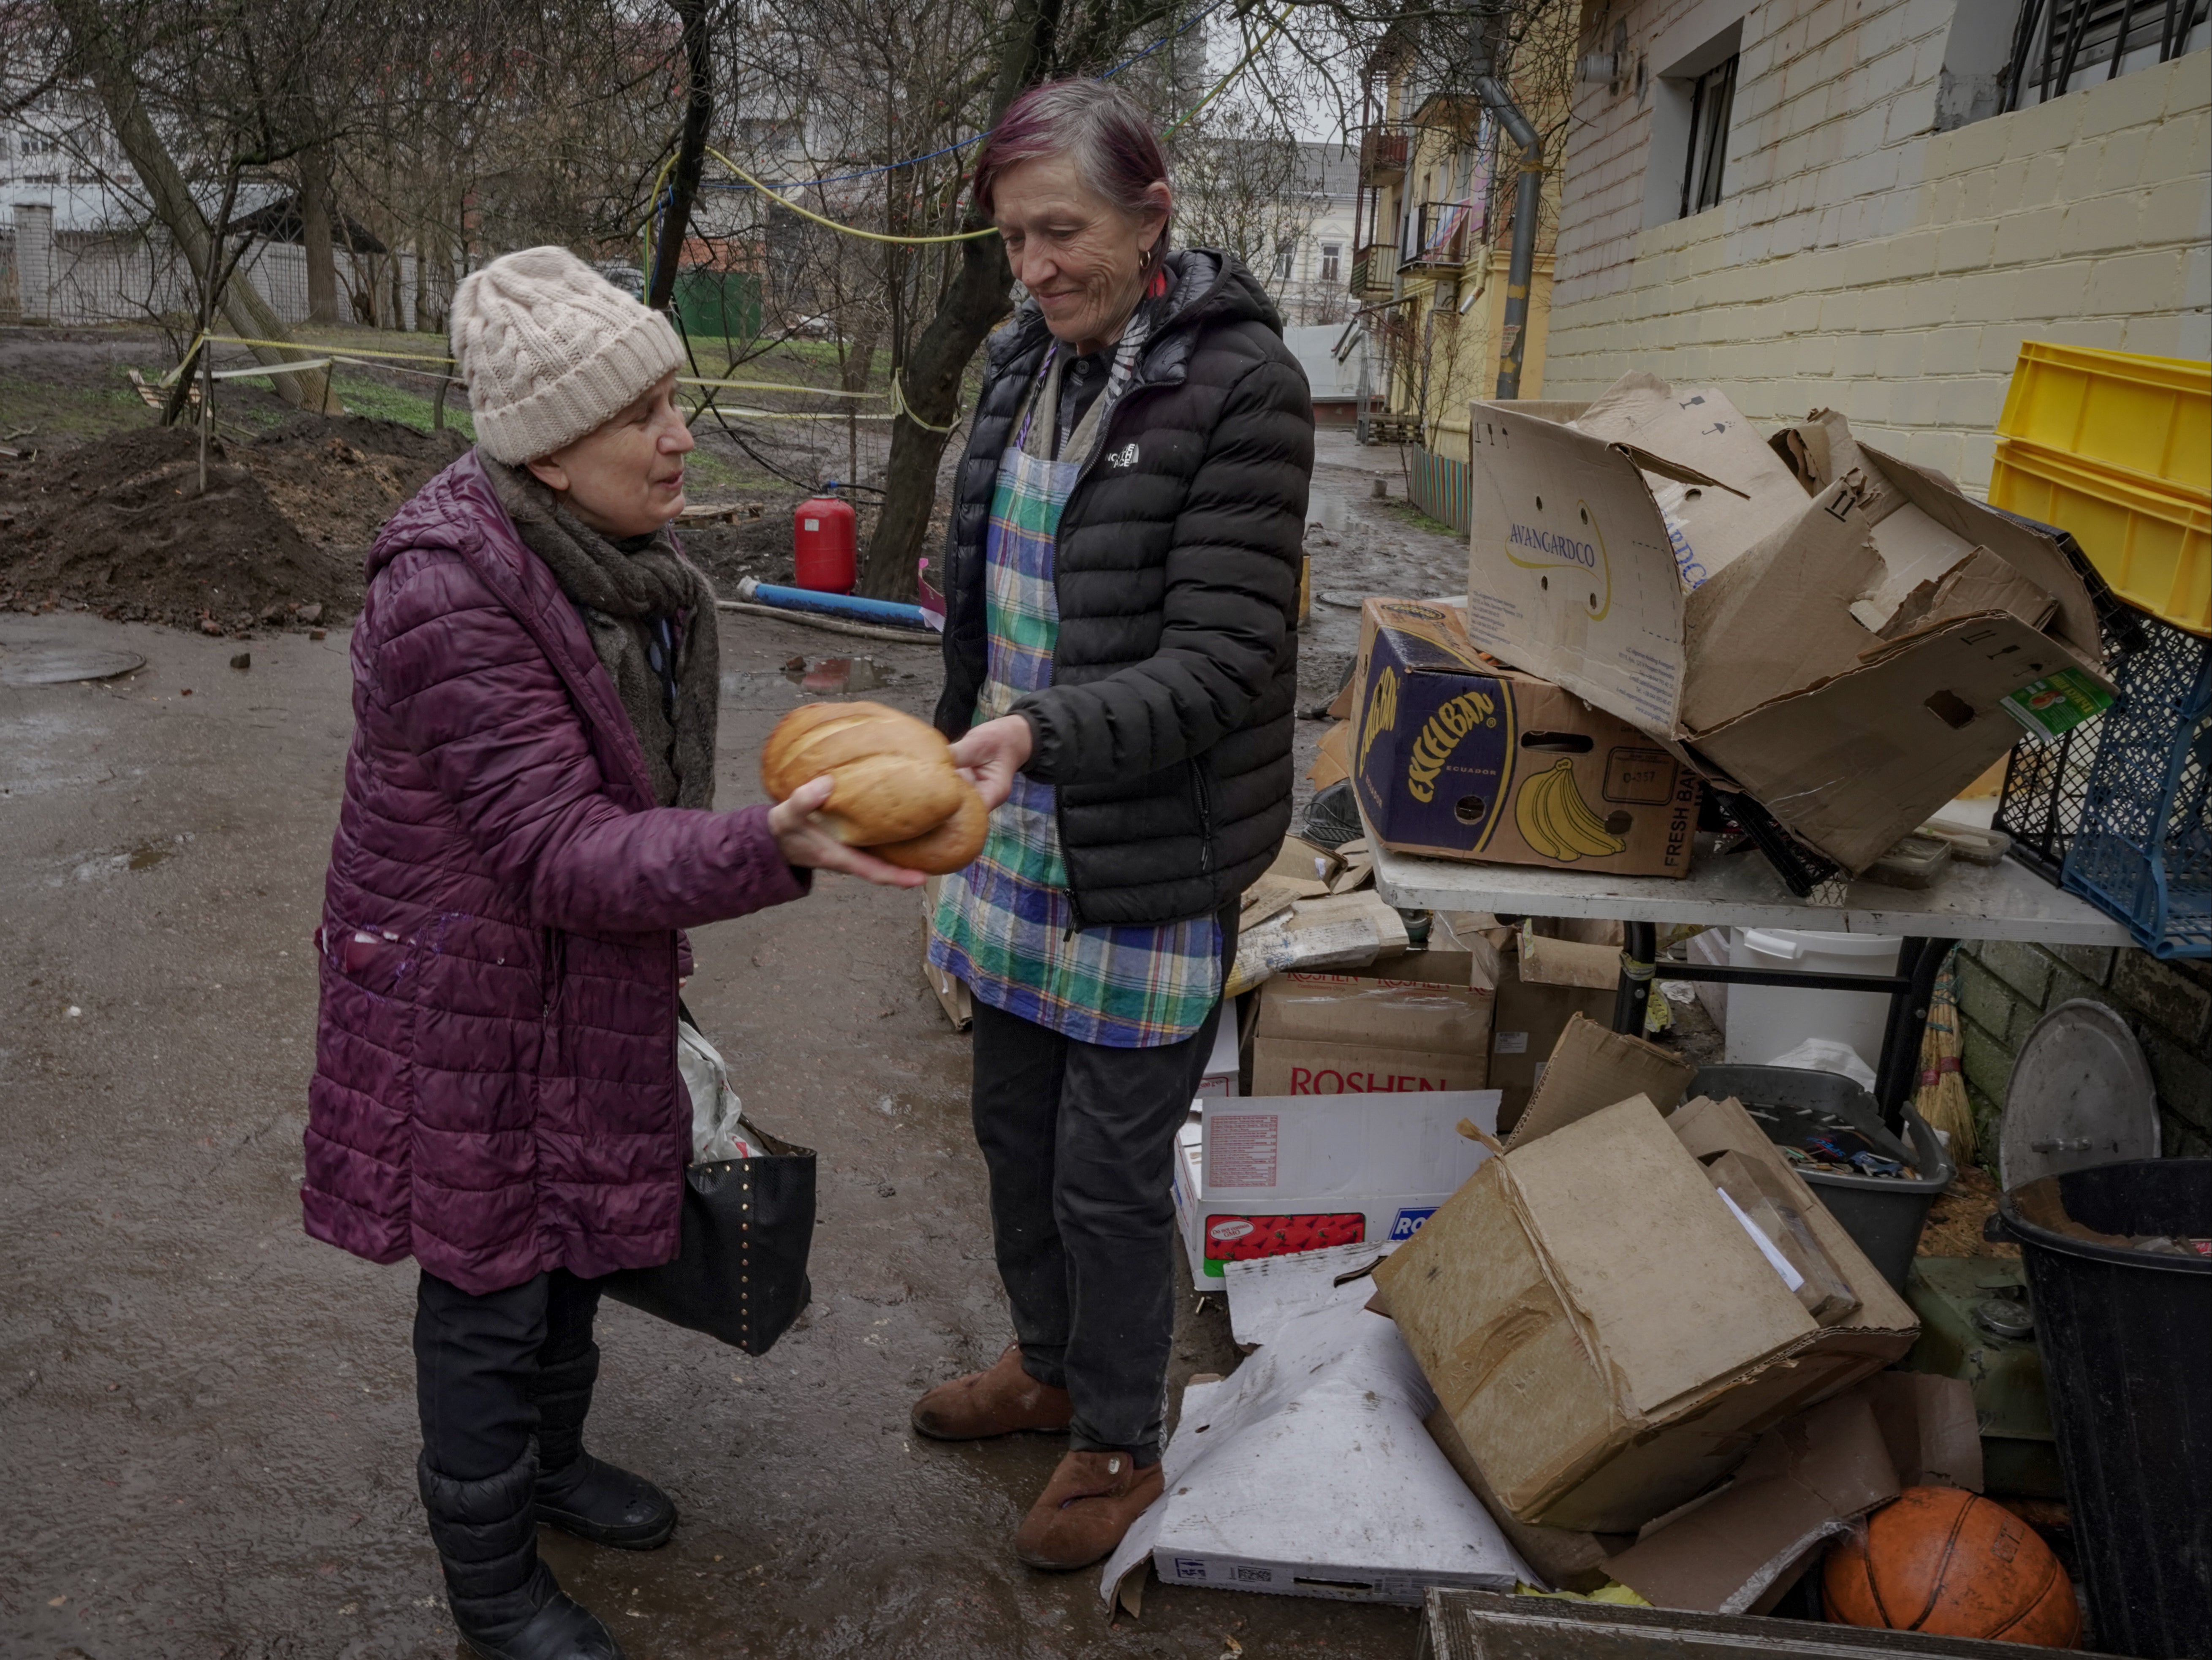 ‘If it wasn’t for them, I don’t think I would be here’: Maria (left) is given bread by the charity in Chernihiv